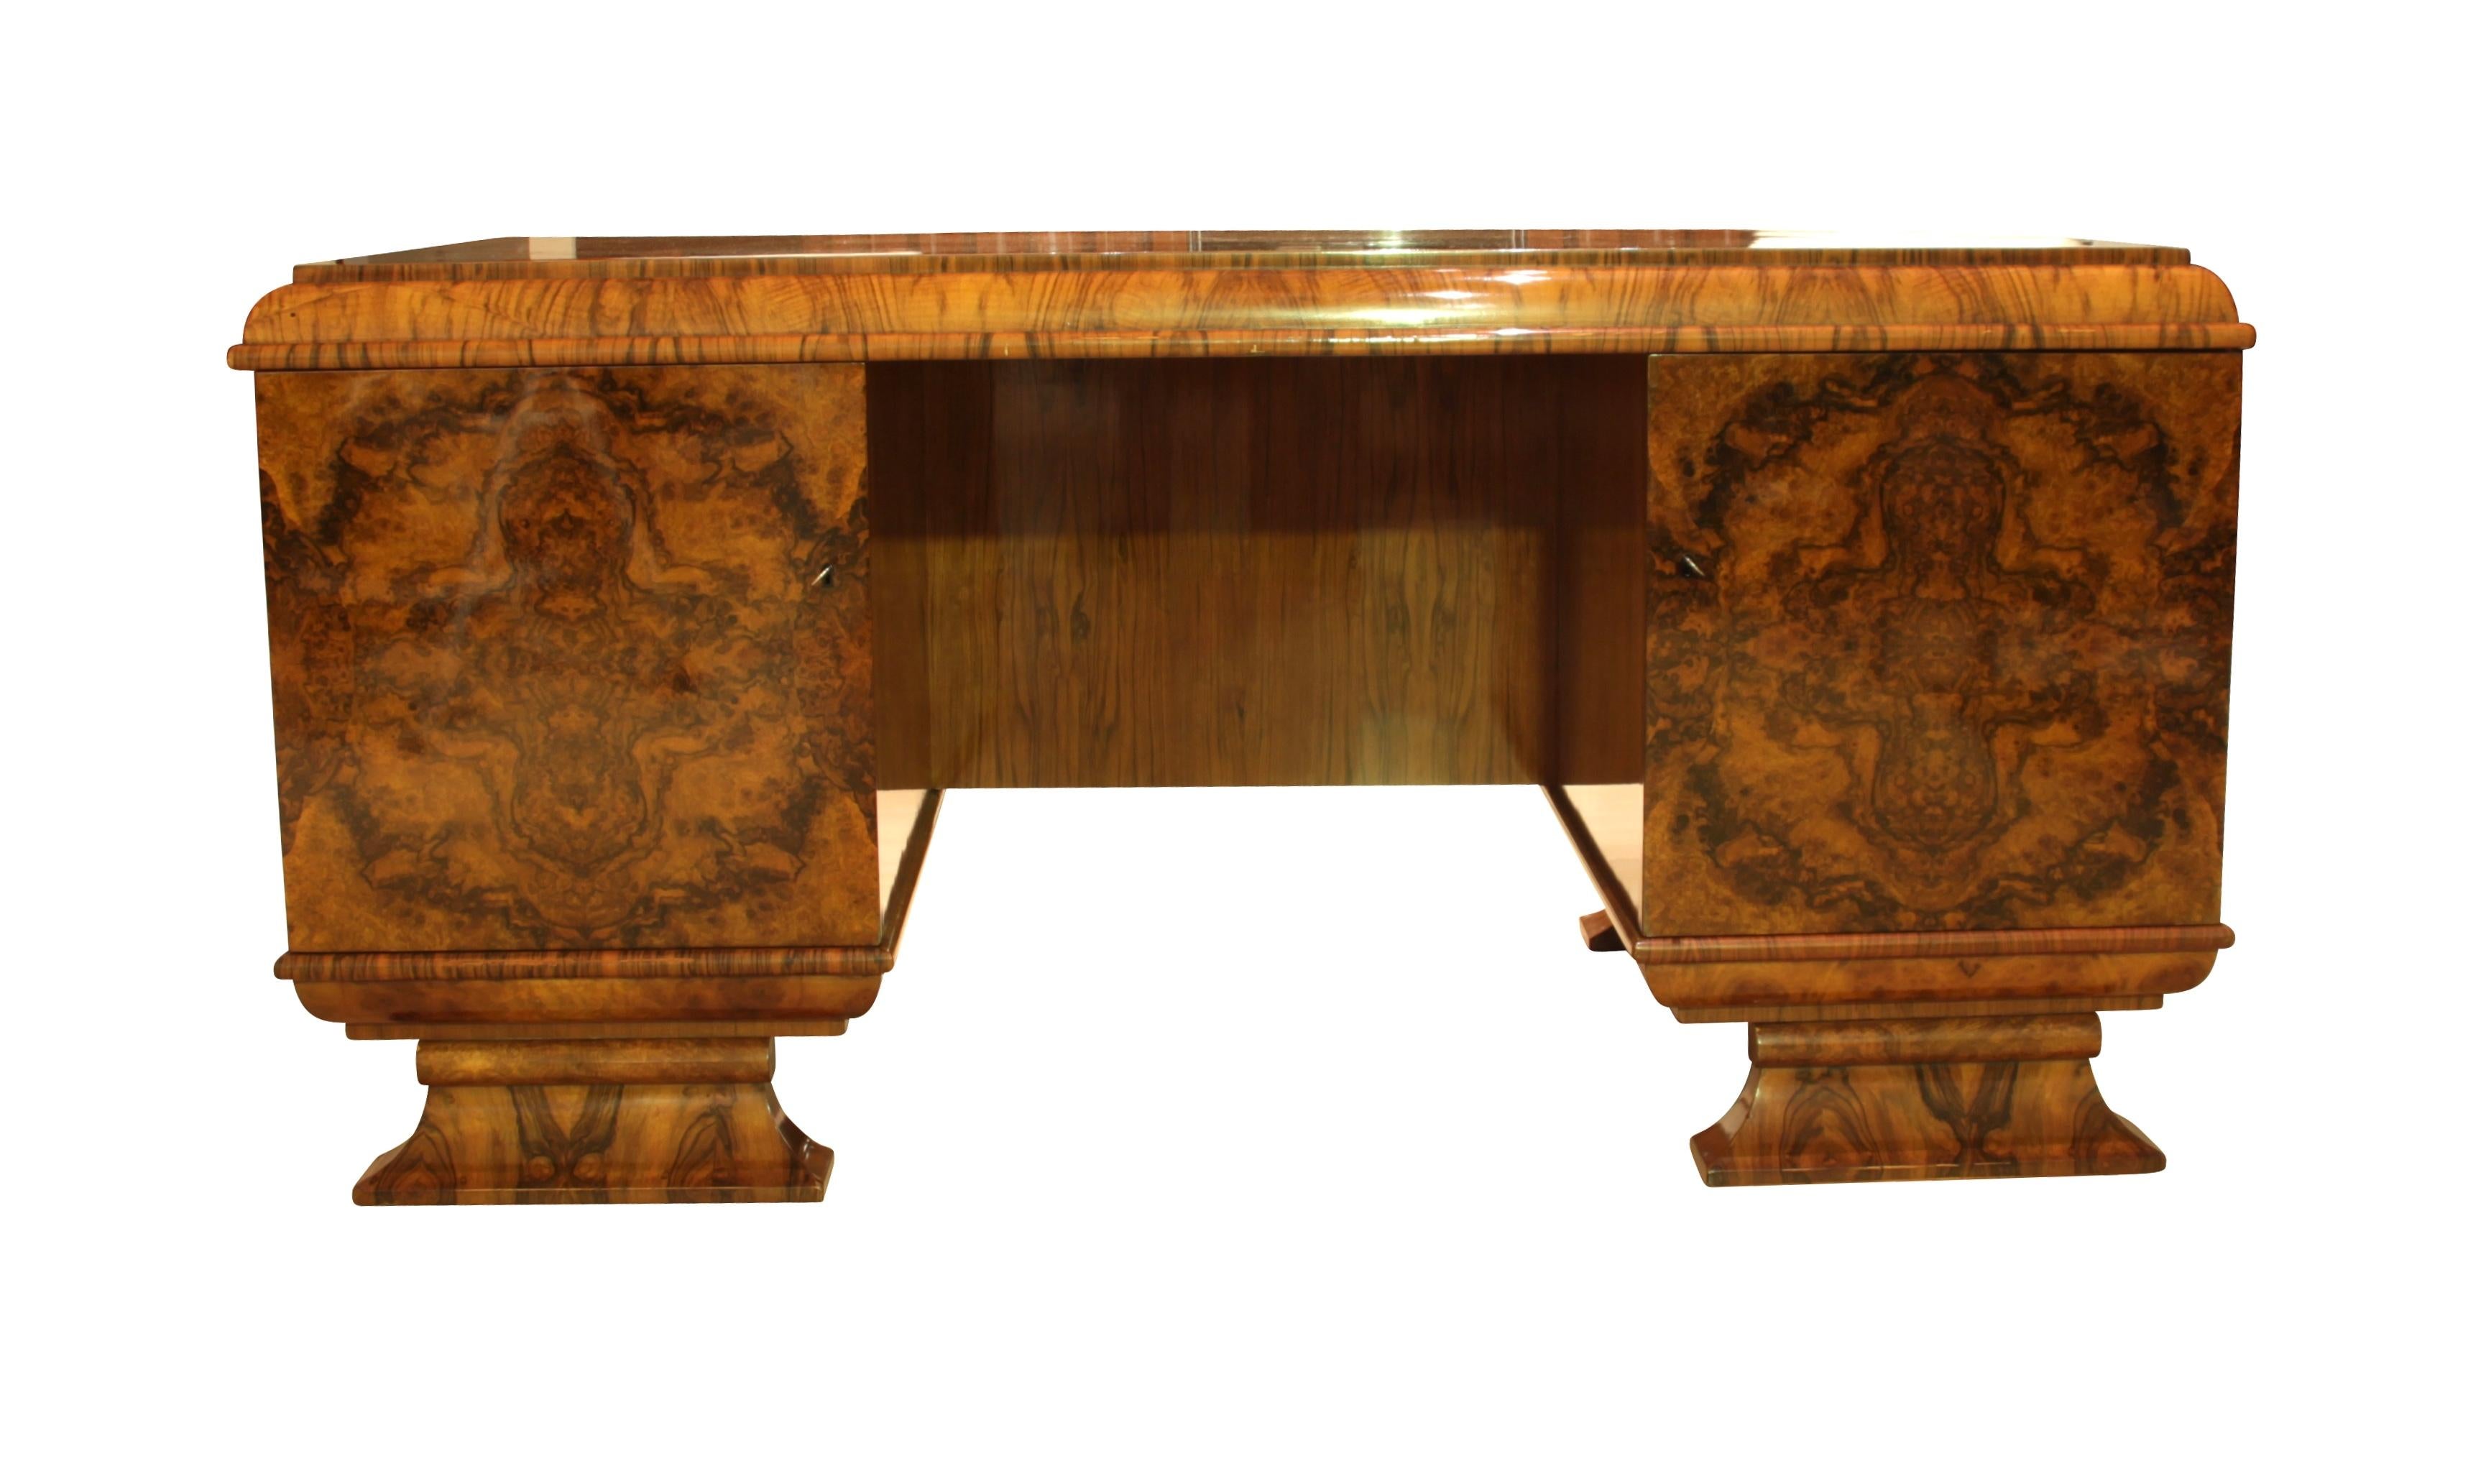 Beautiful Vintage Art Deco Desk, fully restored in polished Walnut from Germany around 1920.

Wonderfully selected book-matched walnut veneer and solid wood, all hand-polished with shellac (French Polished). Noteworthy are also the beautiful